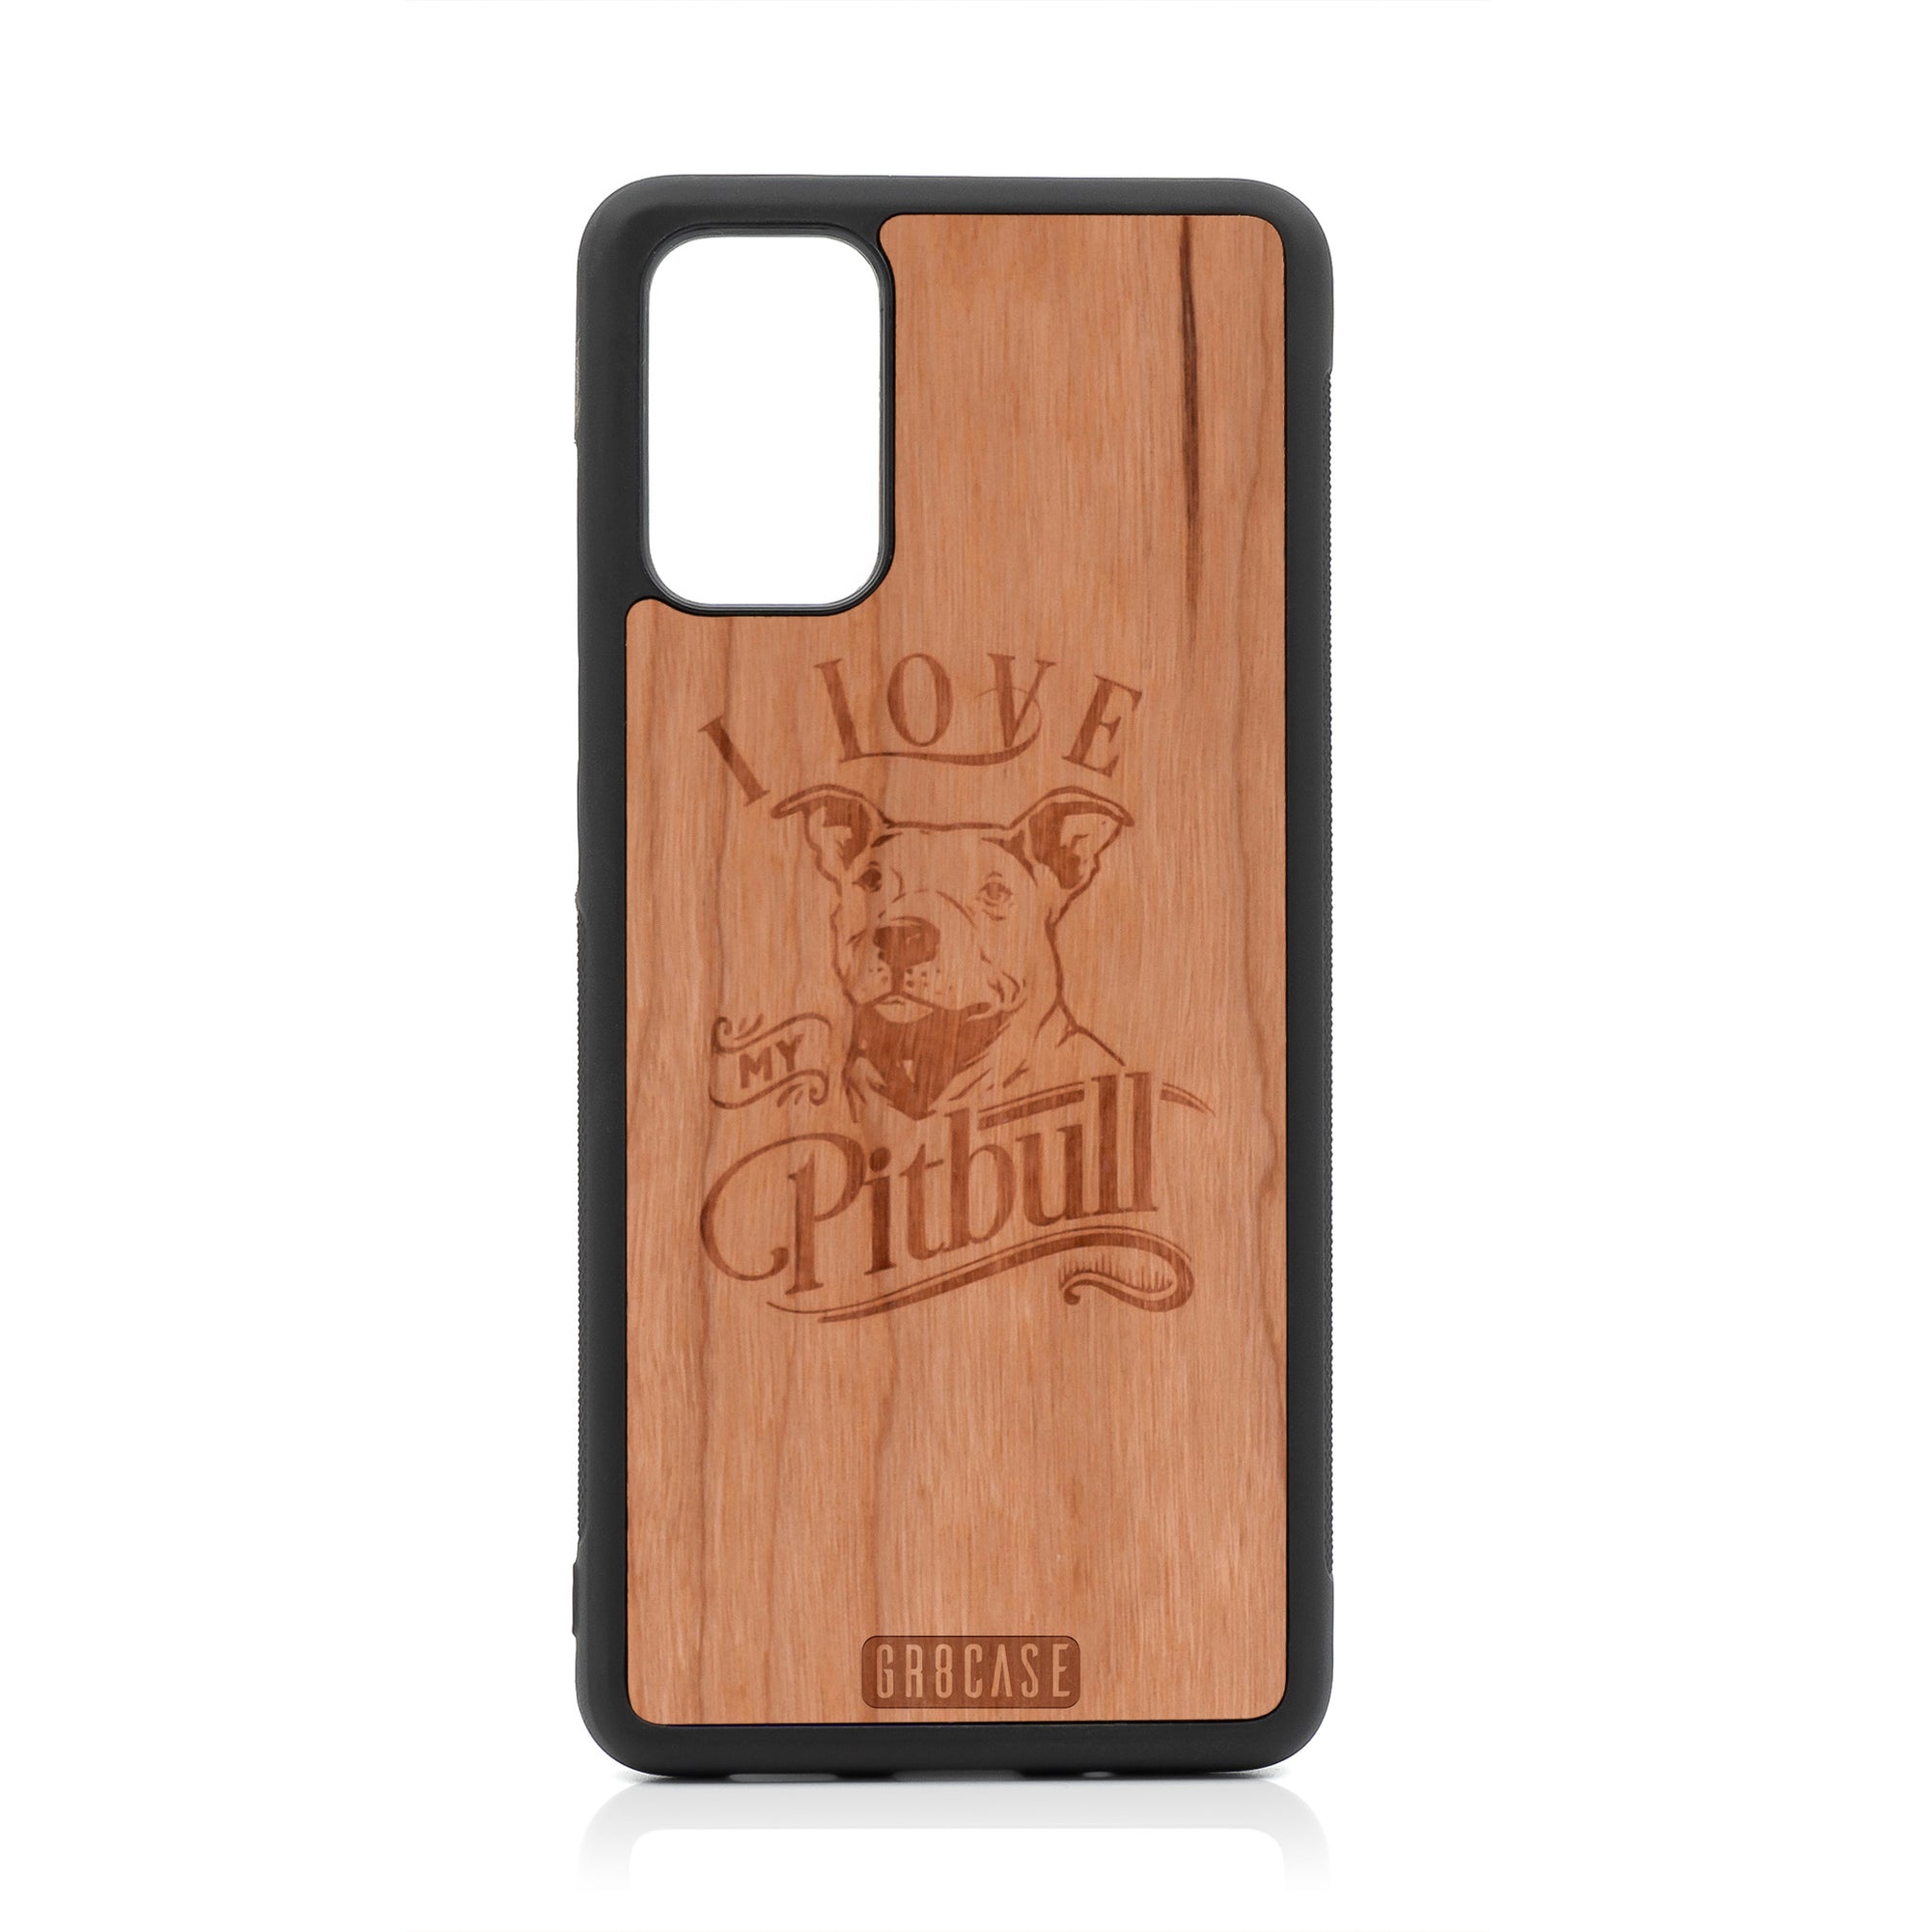 I Love My Pitbull Design Wood Case For Samsung Galaxy S20 Plus by GR8CASE